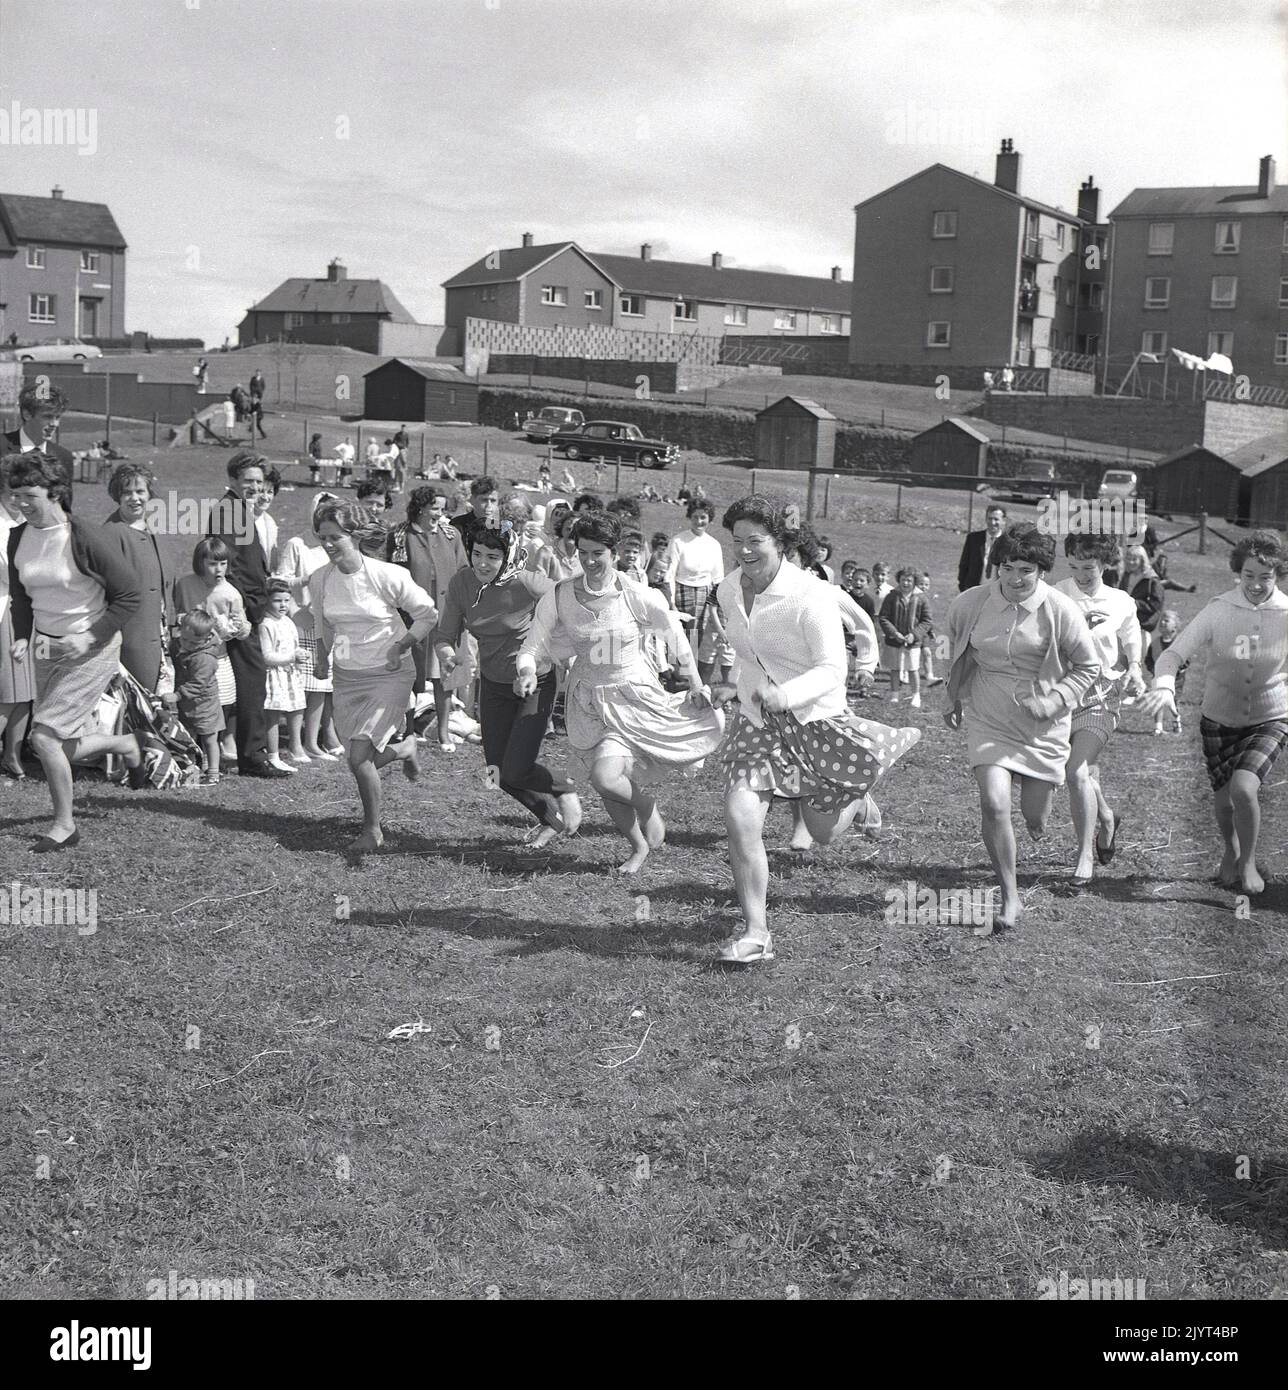 1965, historical, women taking part in a running competition, several in barefeet, on the grass in a field at a housing estate in North Queensferry, Fife, Scotland, UK, as part of the North Queensferry gala day. Stock Photo